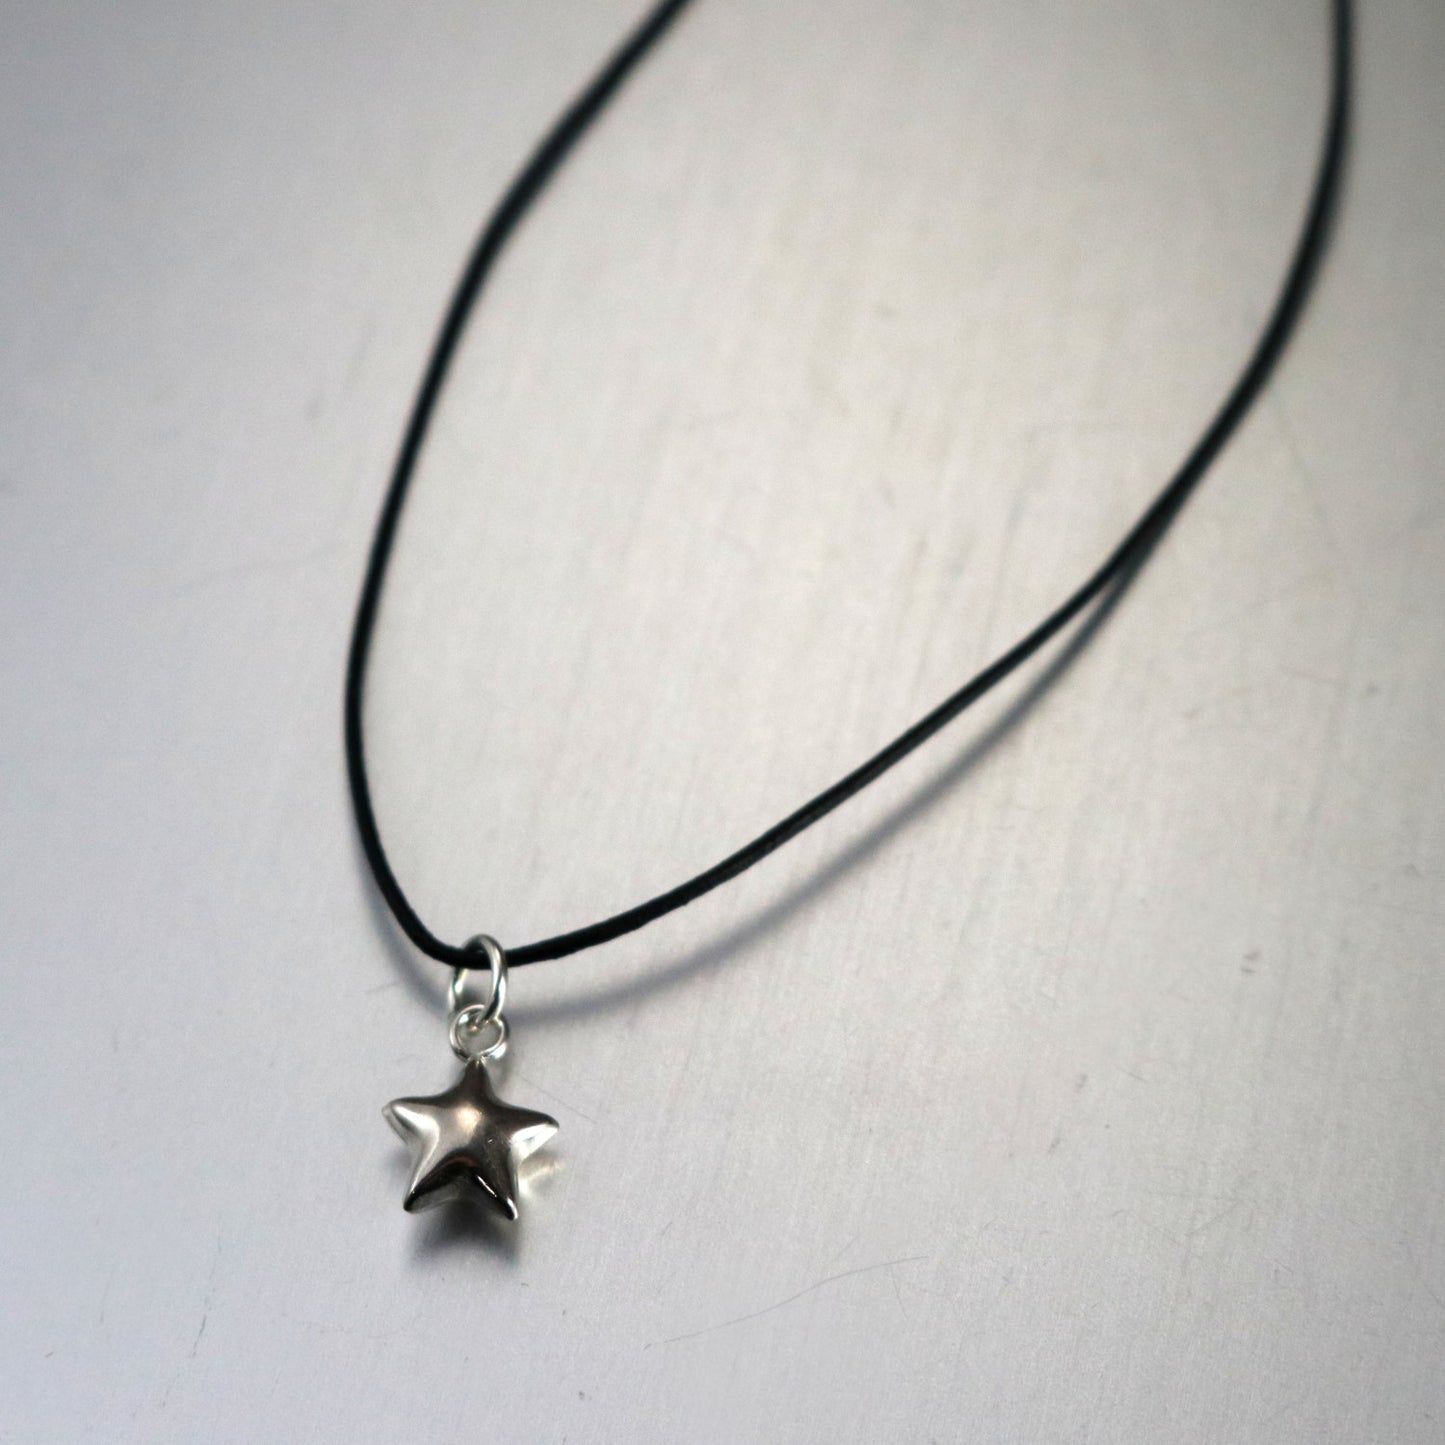 Super Star Sterling Silver Necklace-Womens-LittleGreenRoomJewelry-LittleGreenRoomJewelry